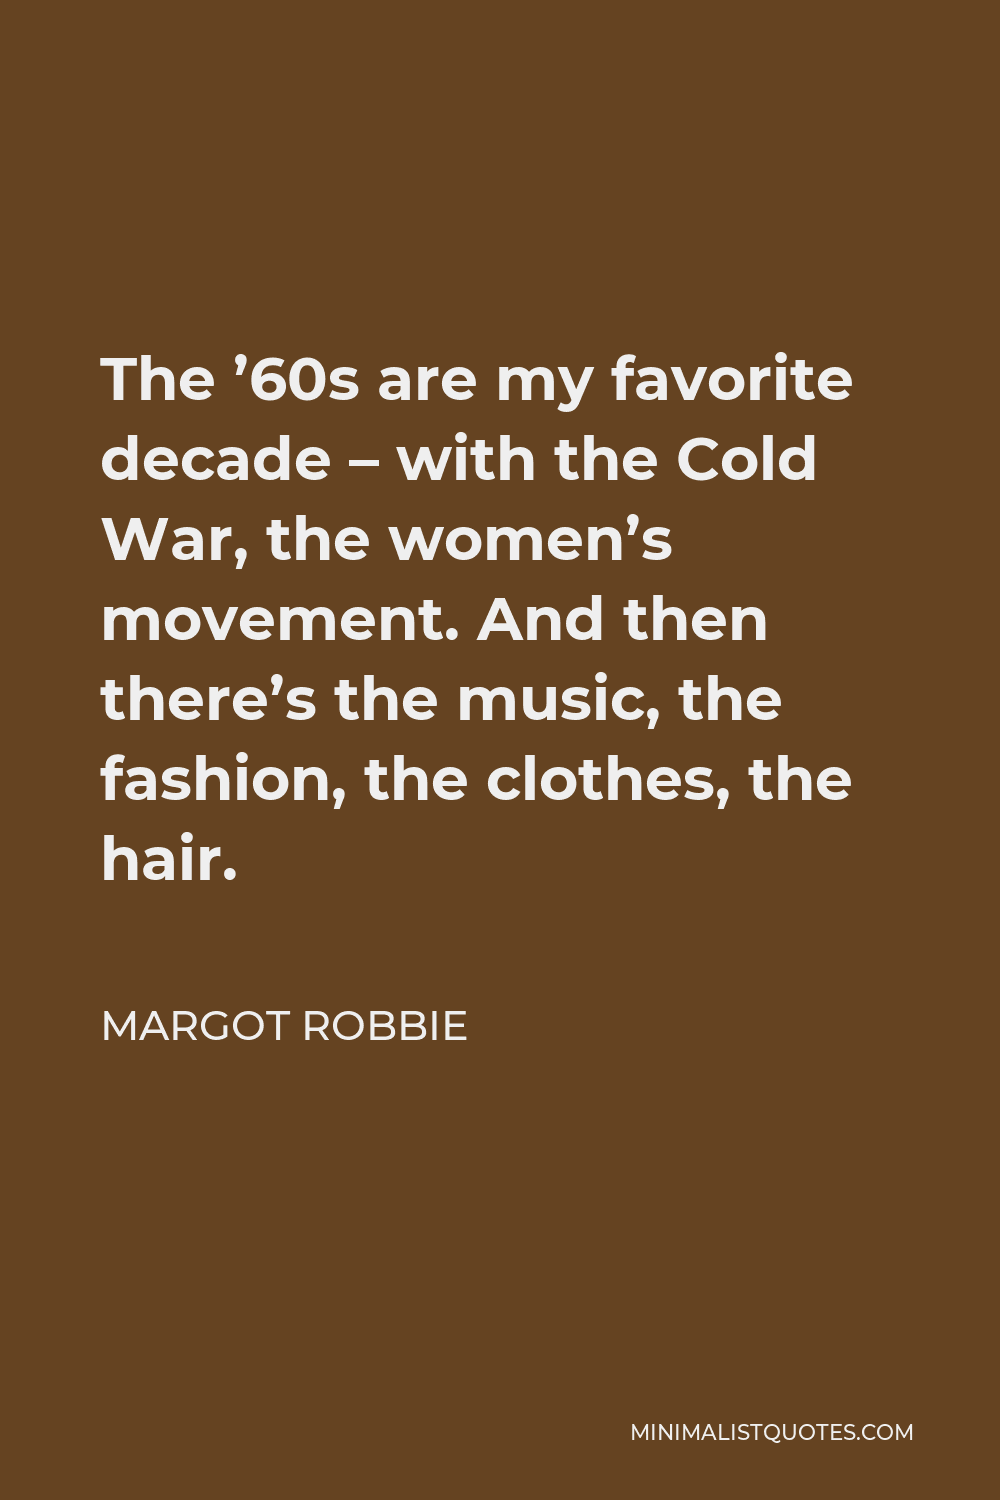 Margot Robbie Quote - The ’60s are my favorite decade – with the Cold War, the women’s movement. And then there’s the music, the fashion, the clothes, the hair.